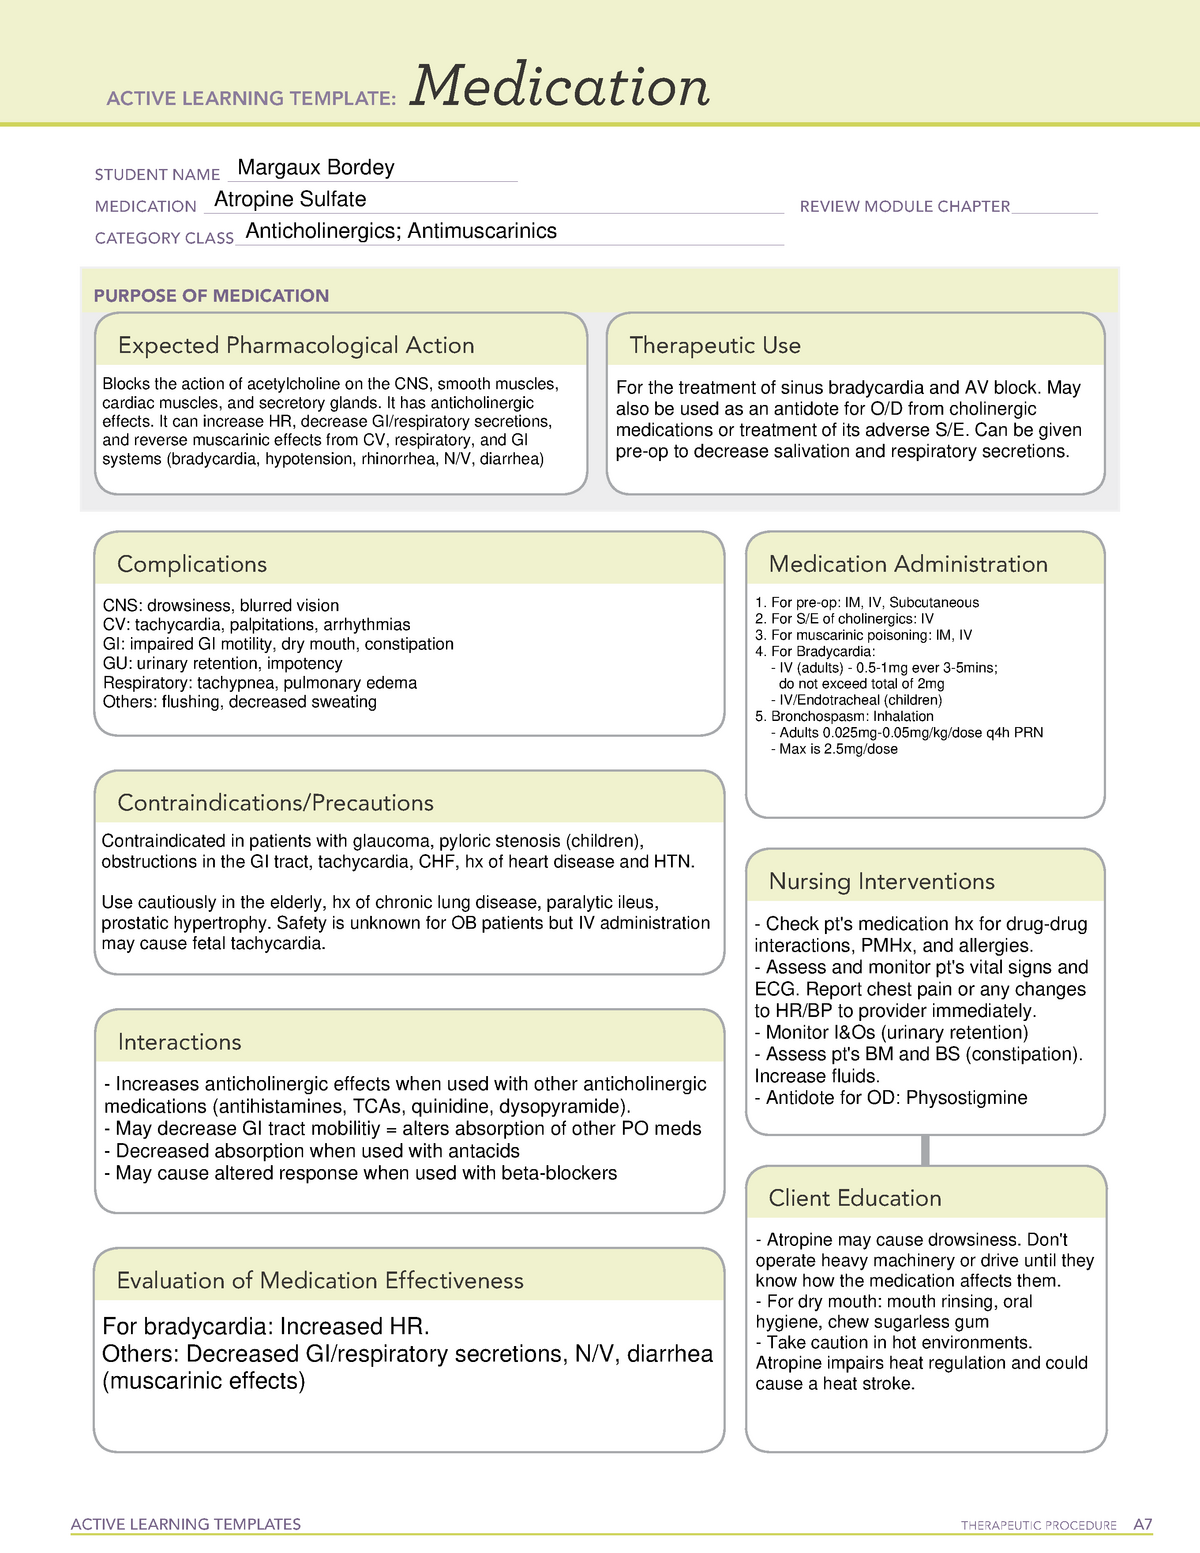 Atropine Sulfate MED lec notes ACTIVE LEARNING TEMPLATES